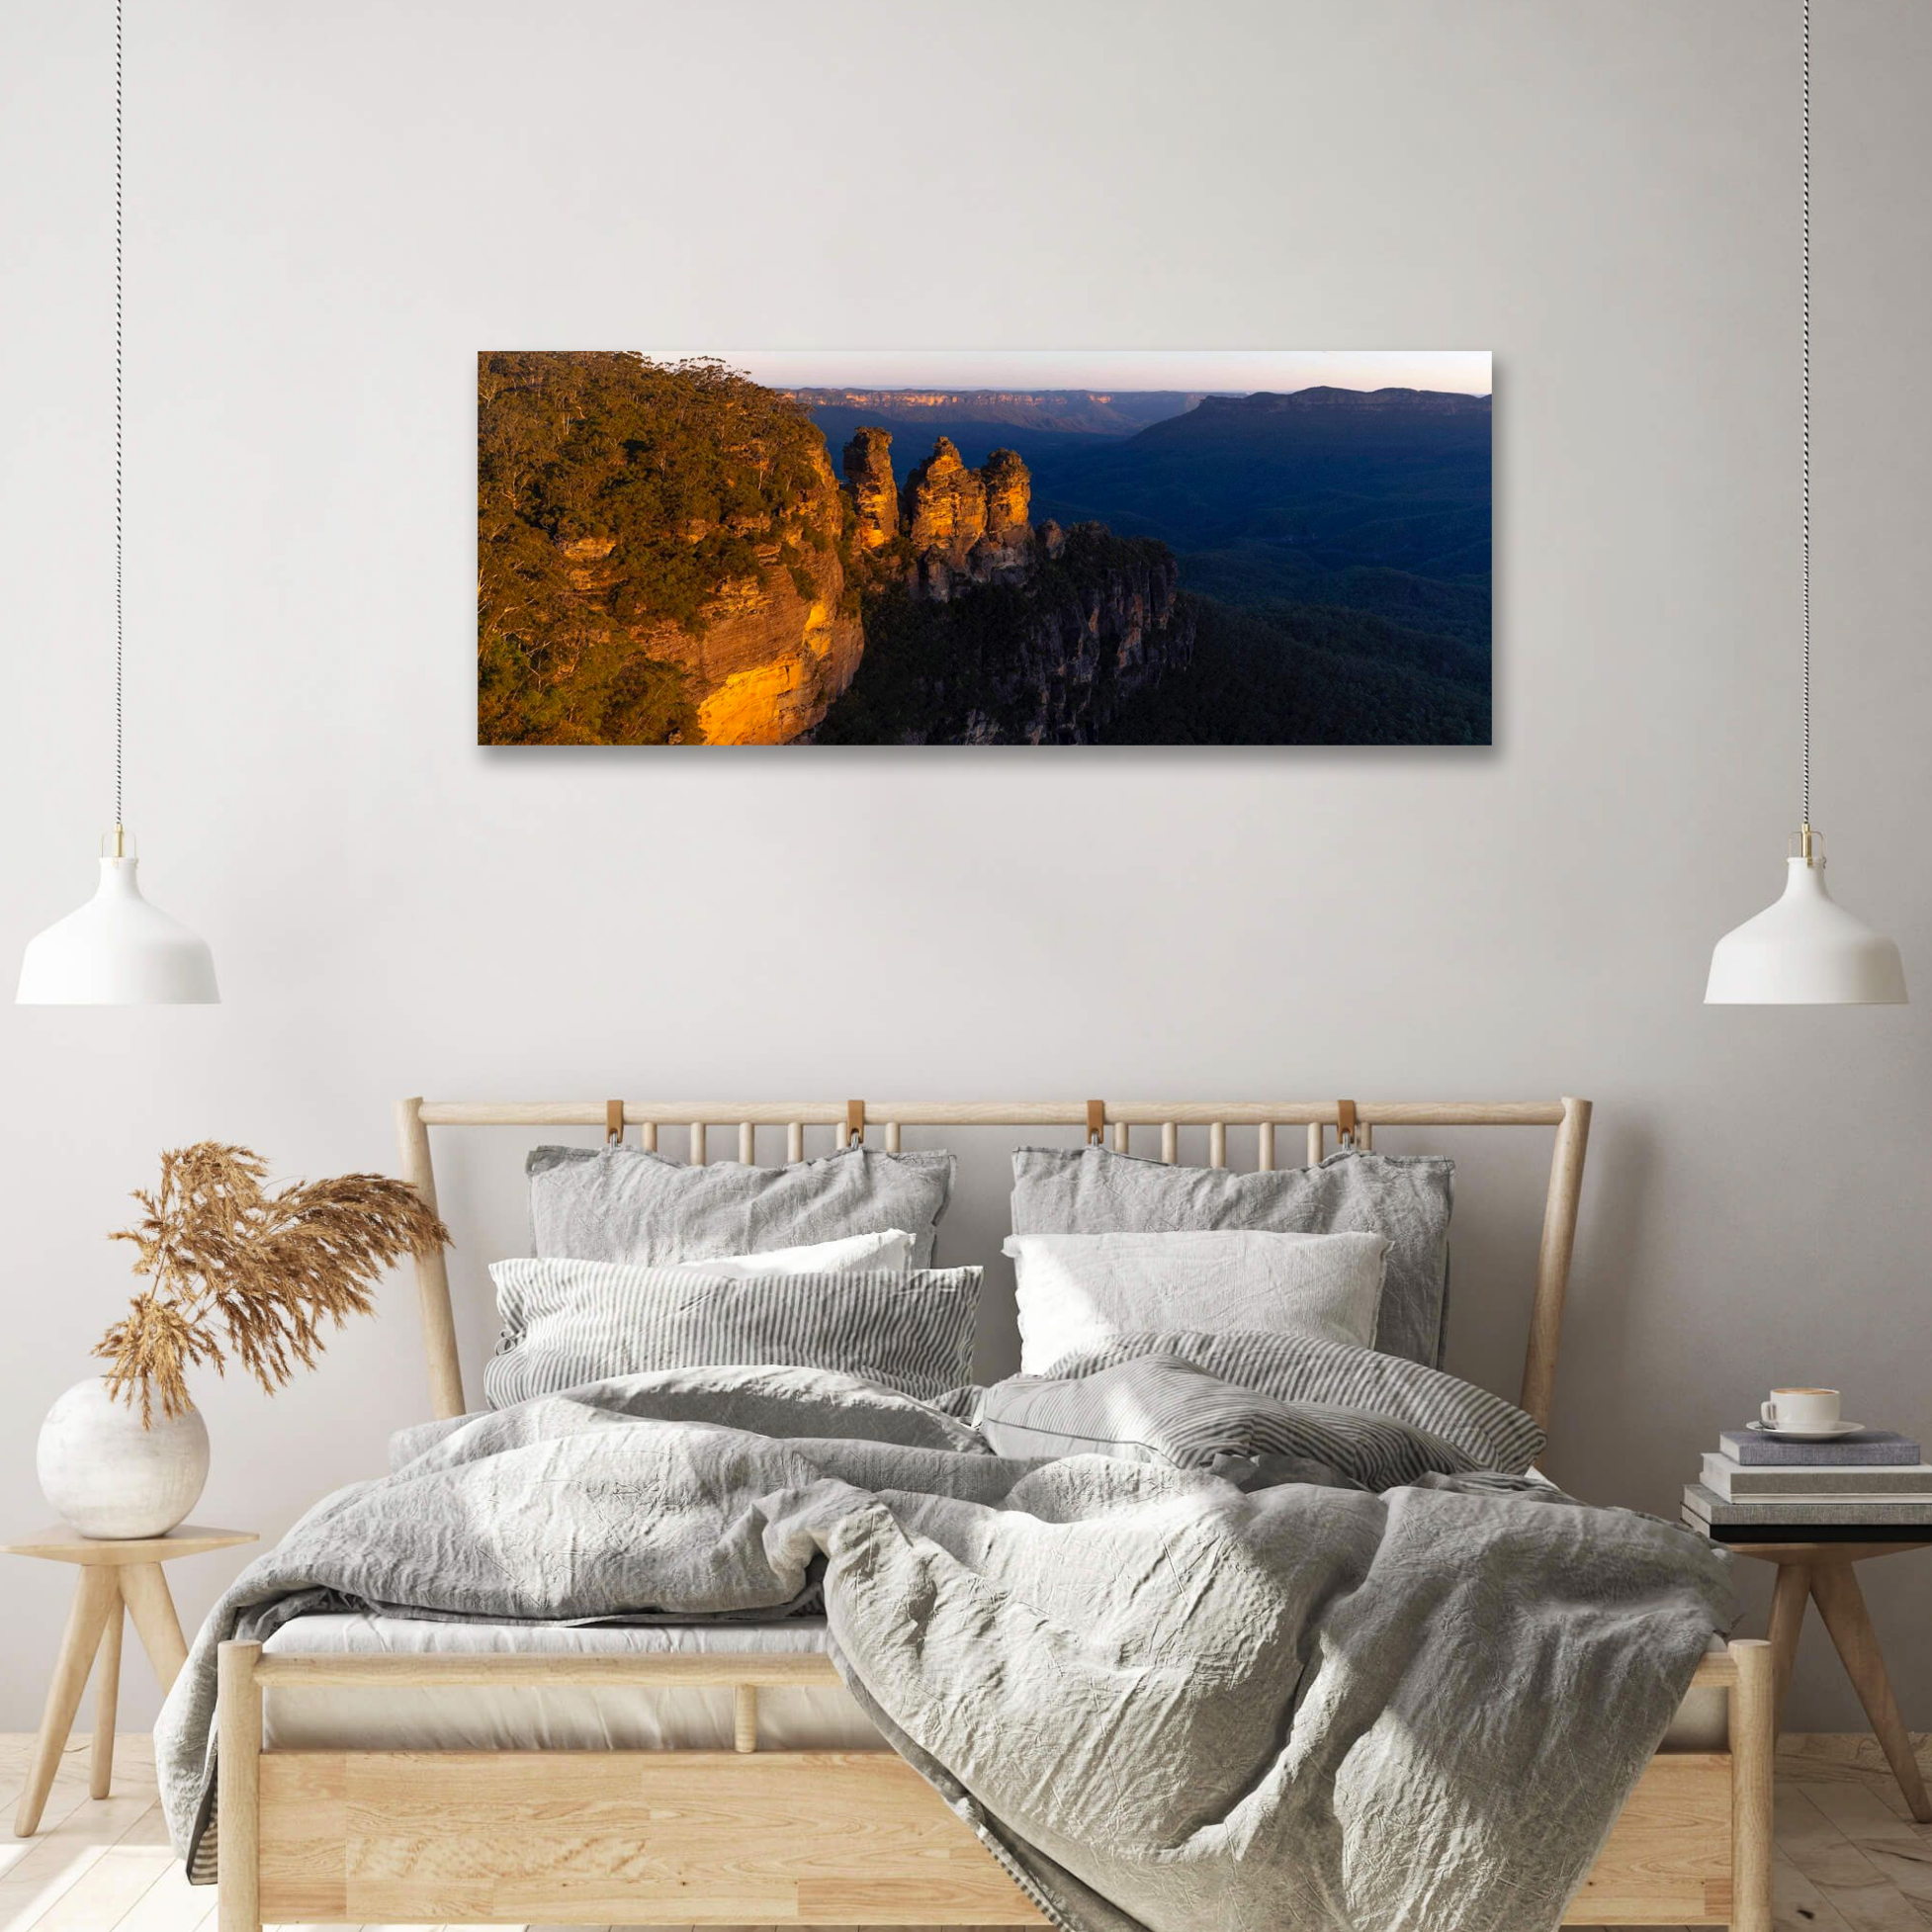 Expand your Horizons with Panoramic Artwork